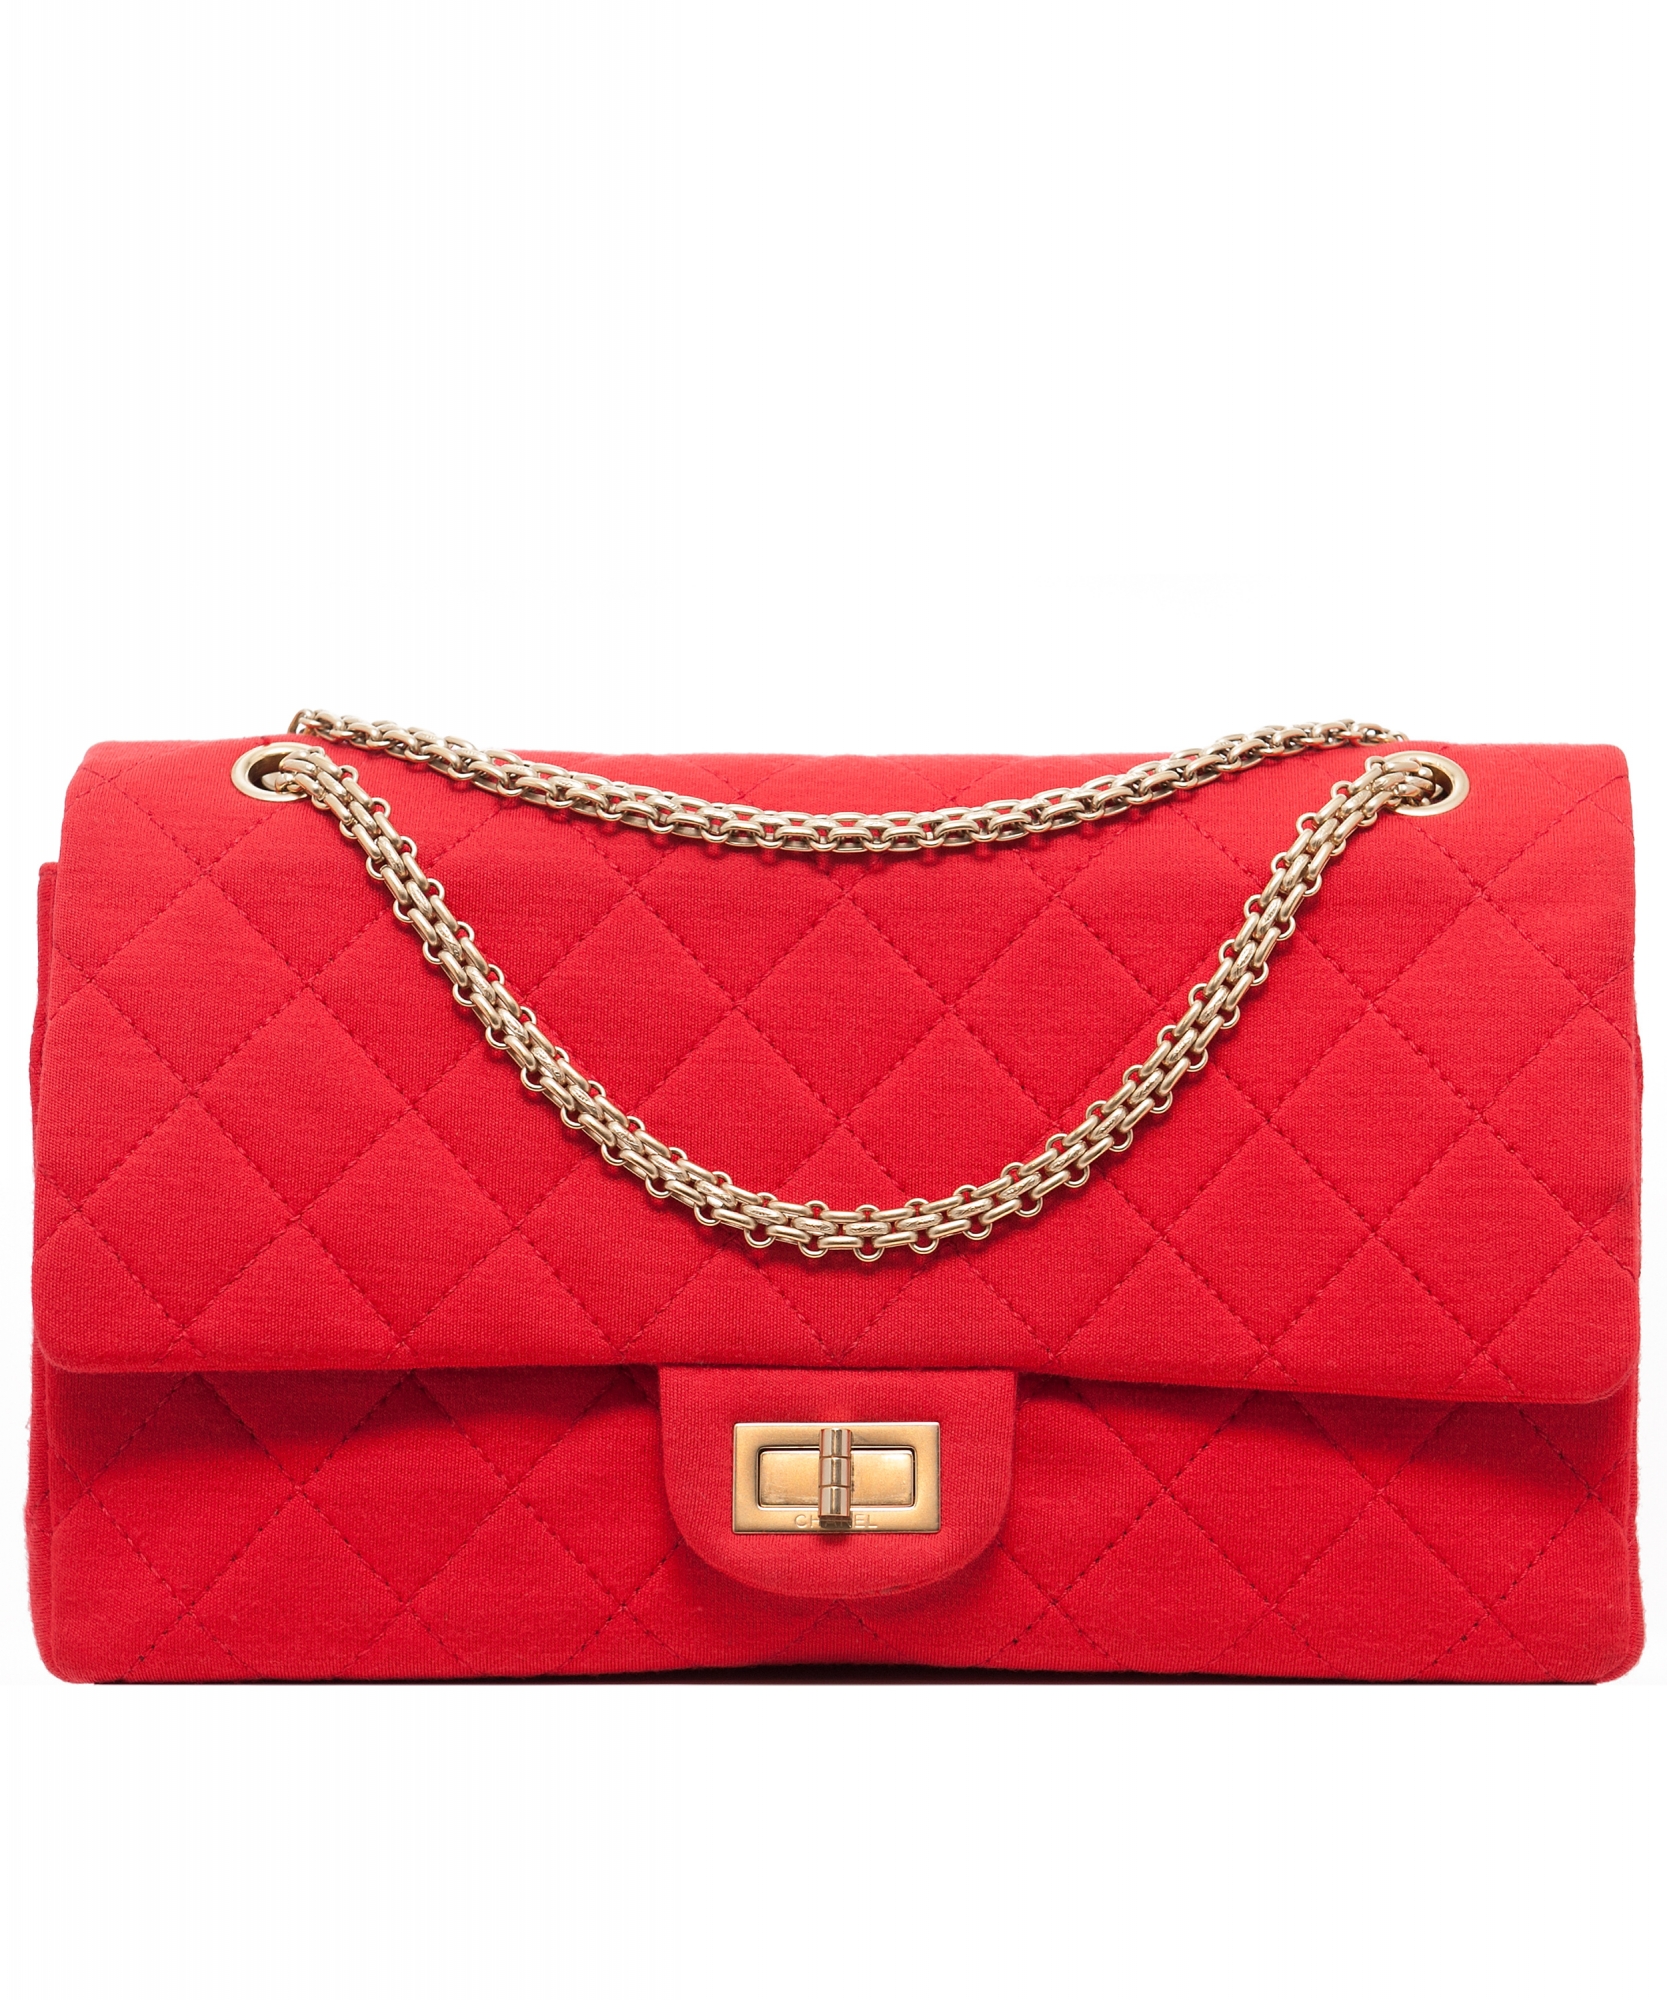 Chanel Red 2.55 Reissue Quilted Classic Jersey 227 Jumbo Flap Bag